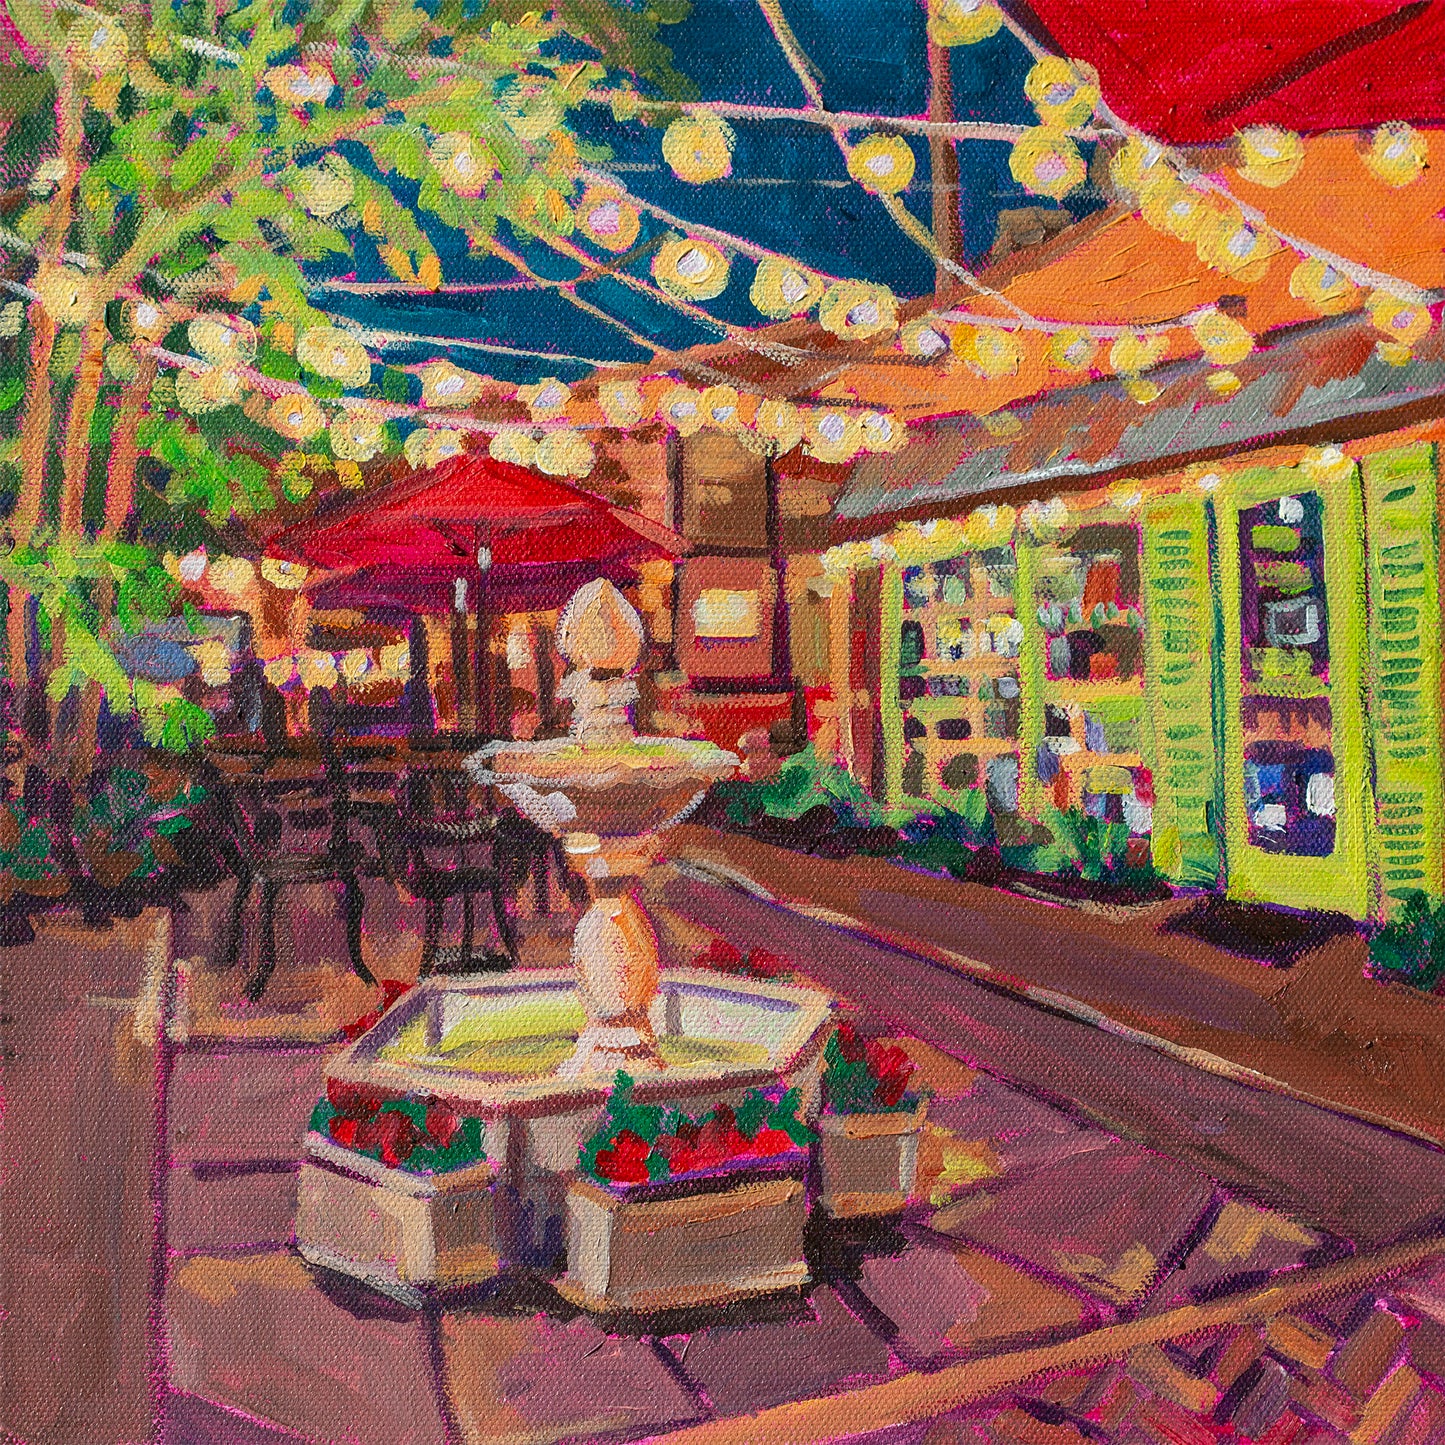 Winter Park Nightlife 2 painting 12x12 vibrant hidden courtyard with strung lights, fountain and tables with umbrellas off Park Ave.